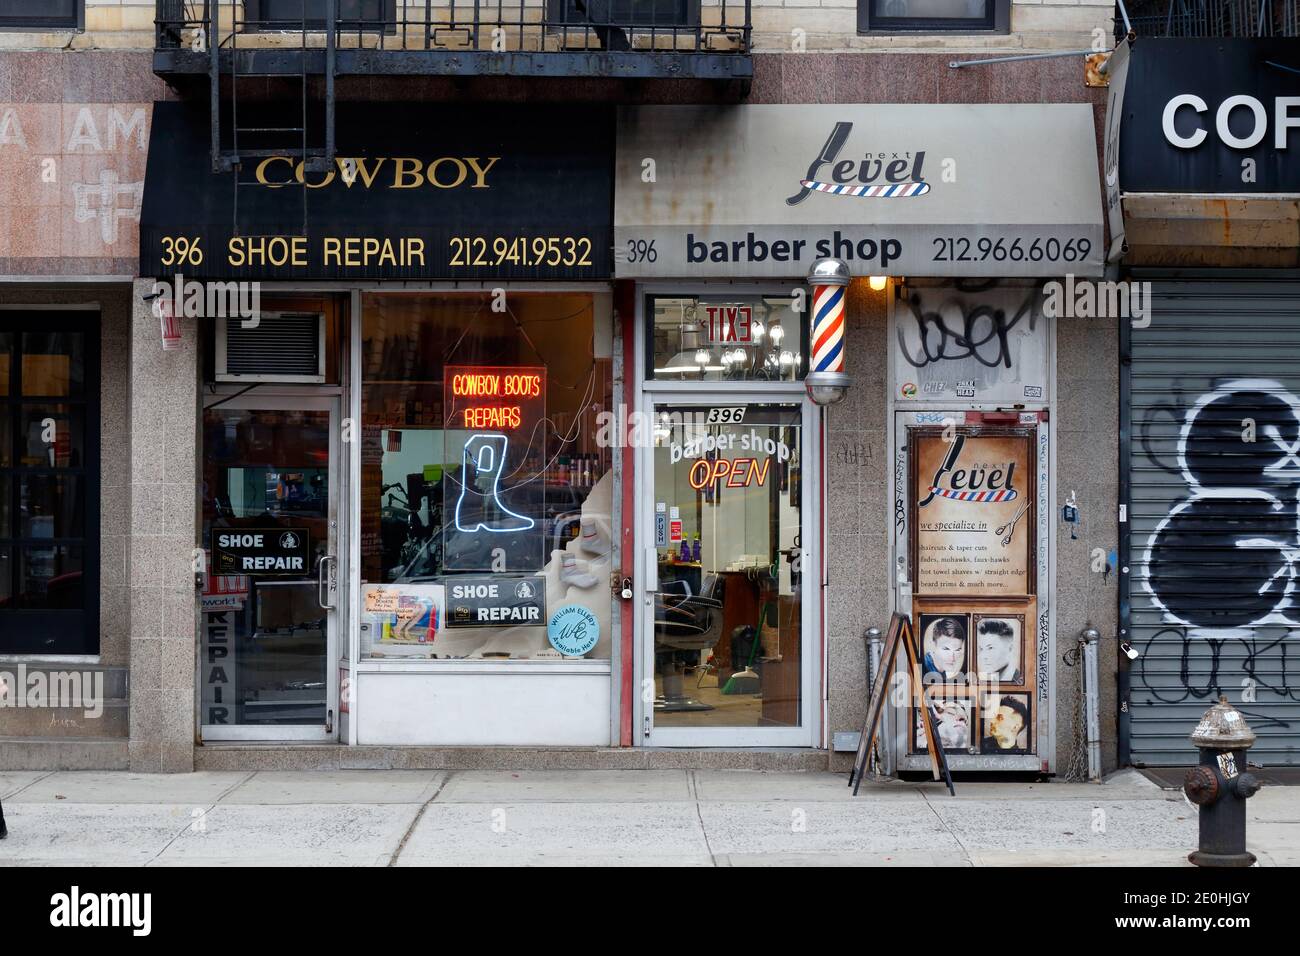 Cowboy Shoe Repair, Next Level Barber Shop, 396 Broome St, New York, NY. exterior storefront of a shoe repair shop and a barbershop in SoHo. Stock Photo